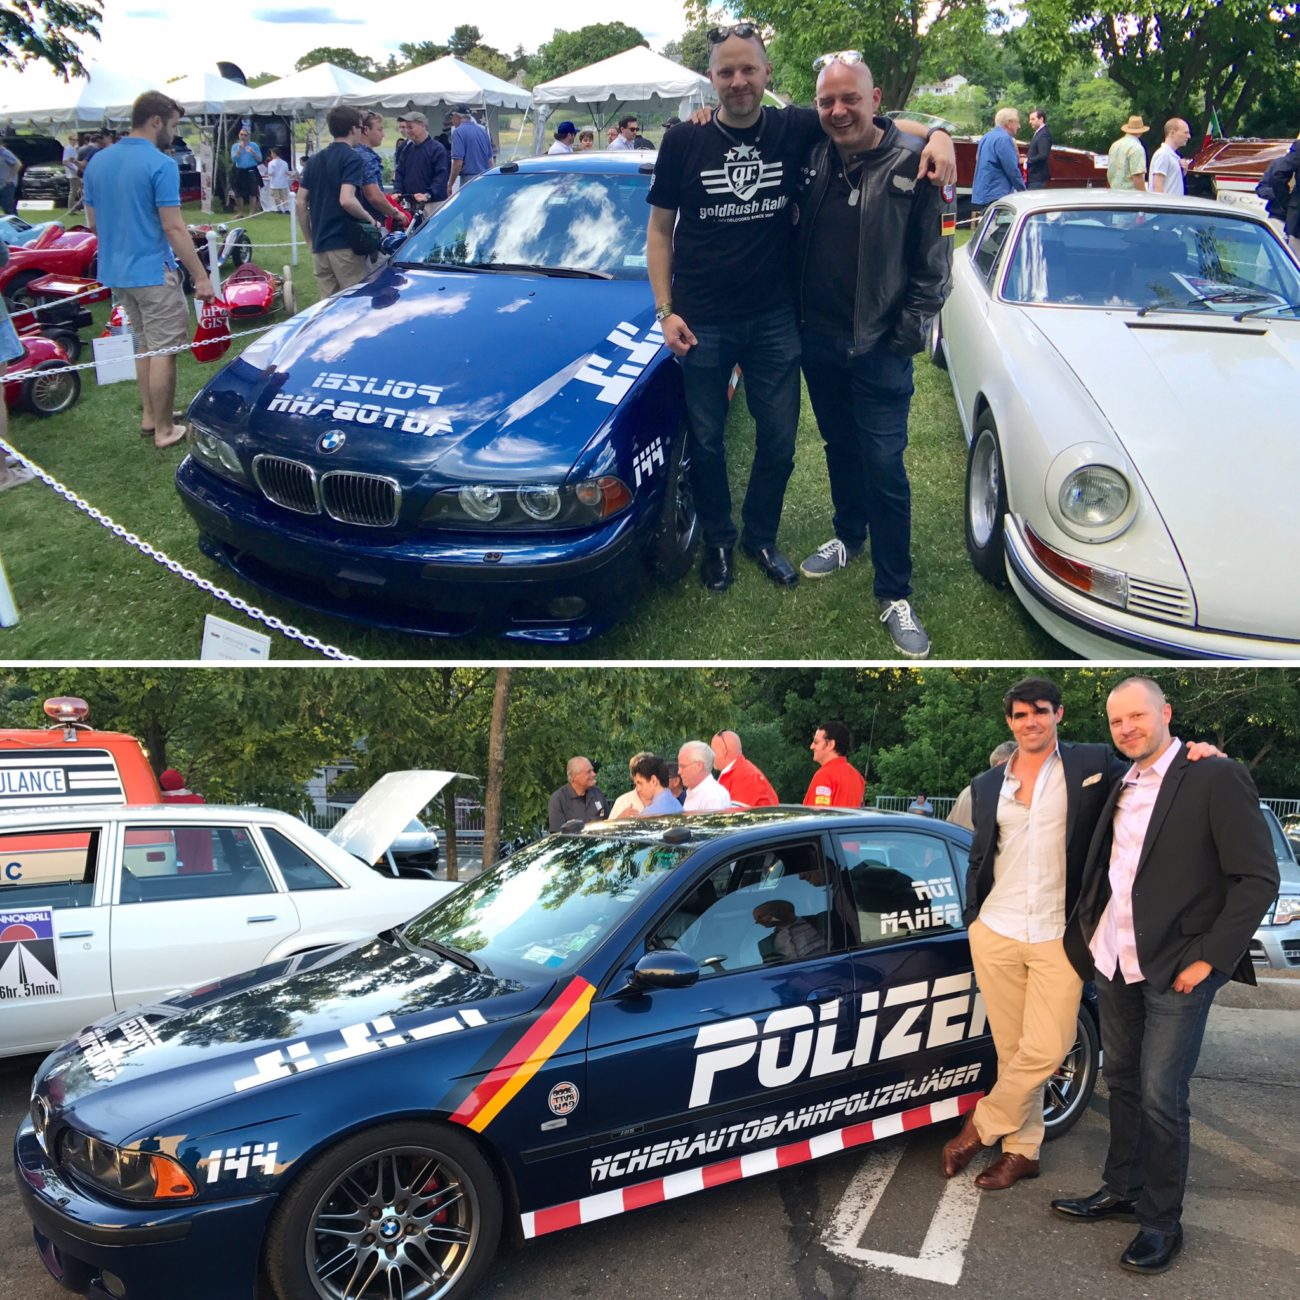 Former Cannonball Record Holders Alex Roy and David Maher BMW M5 Polizei 144 